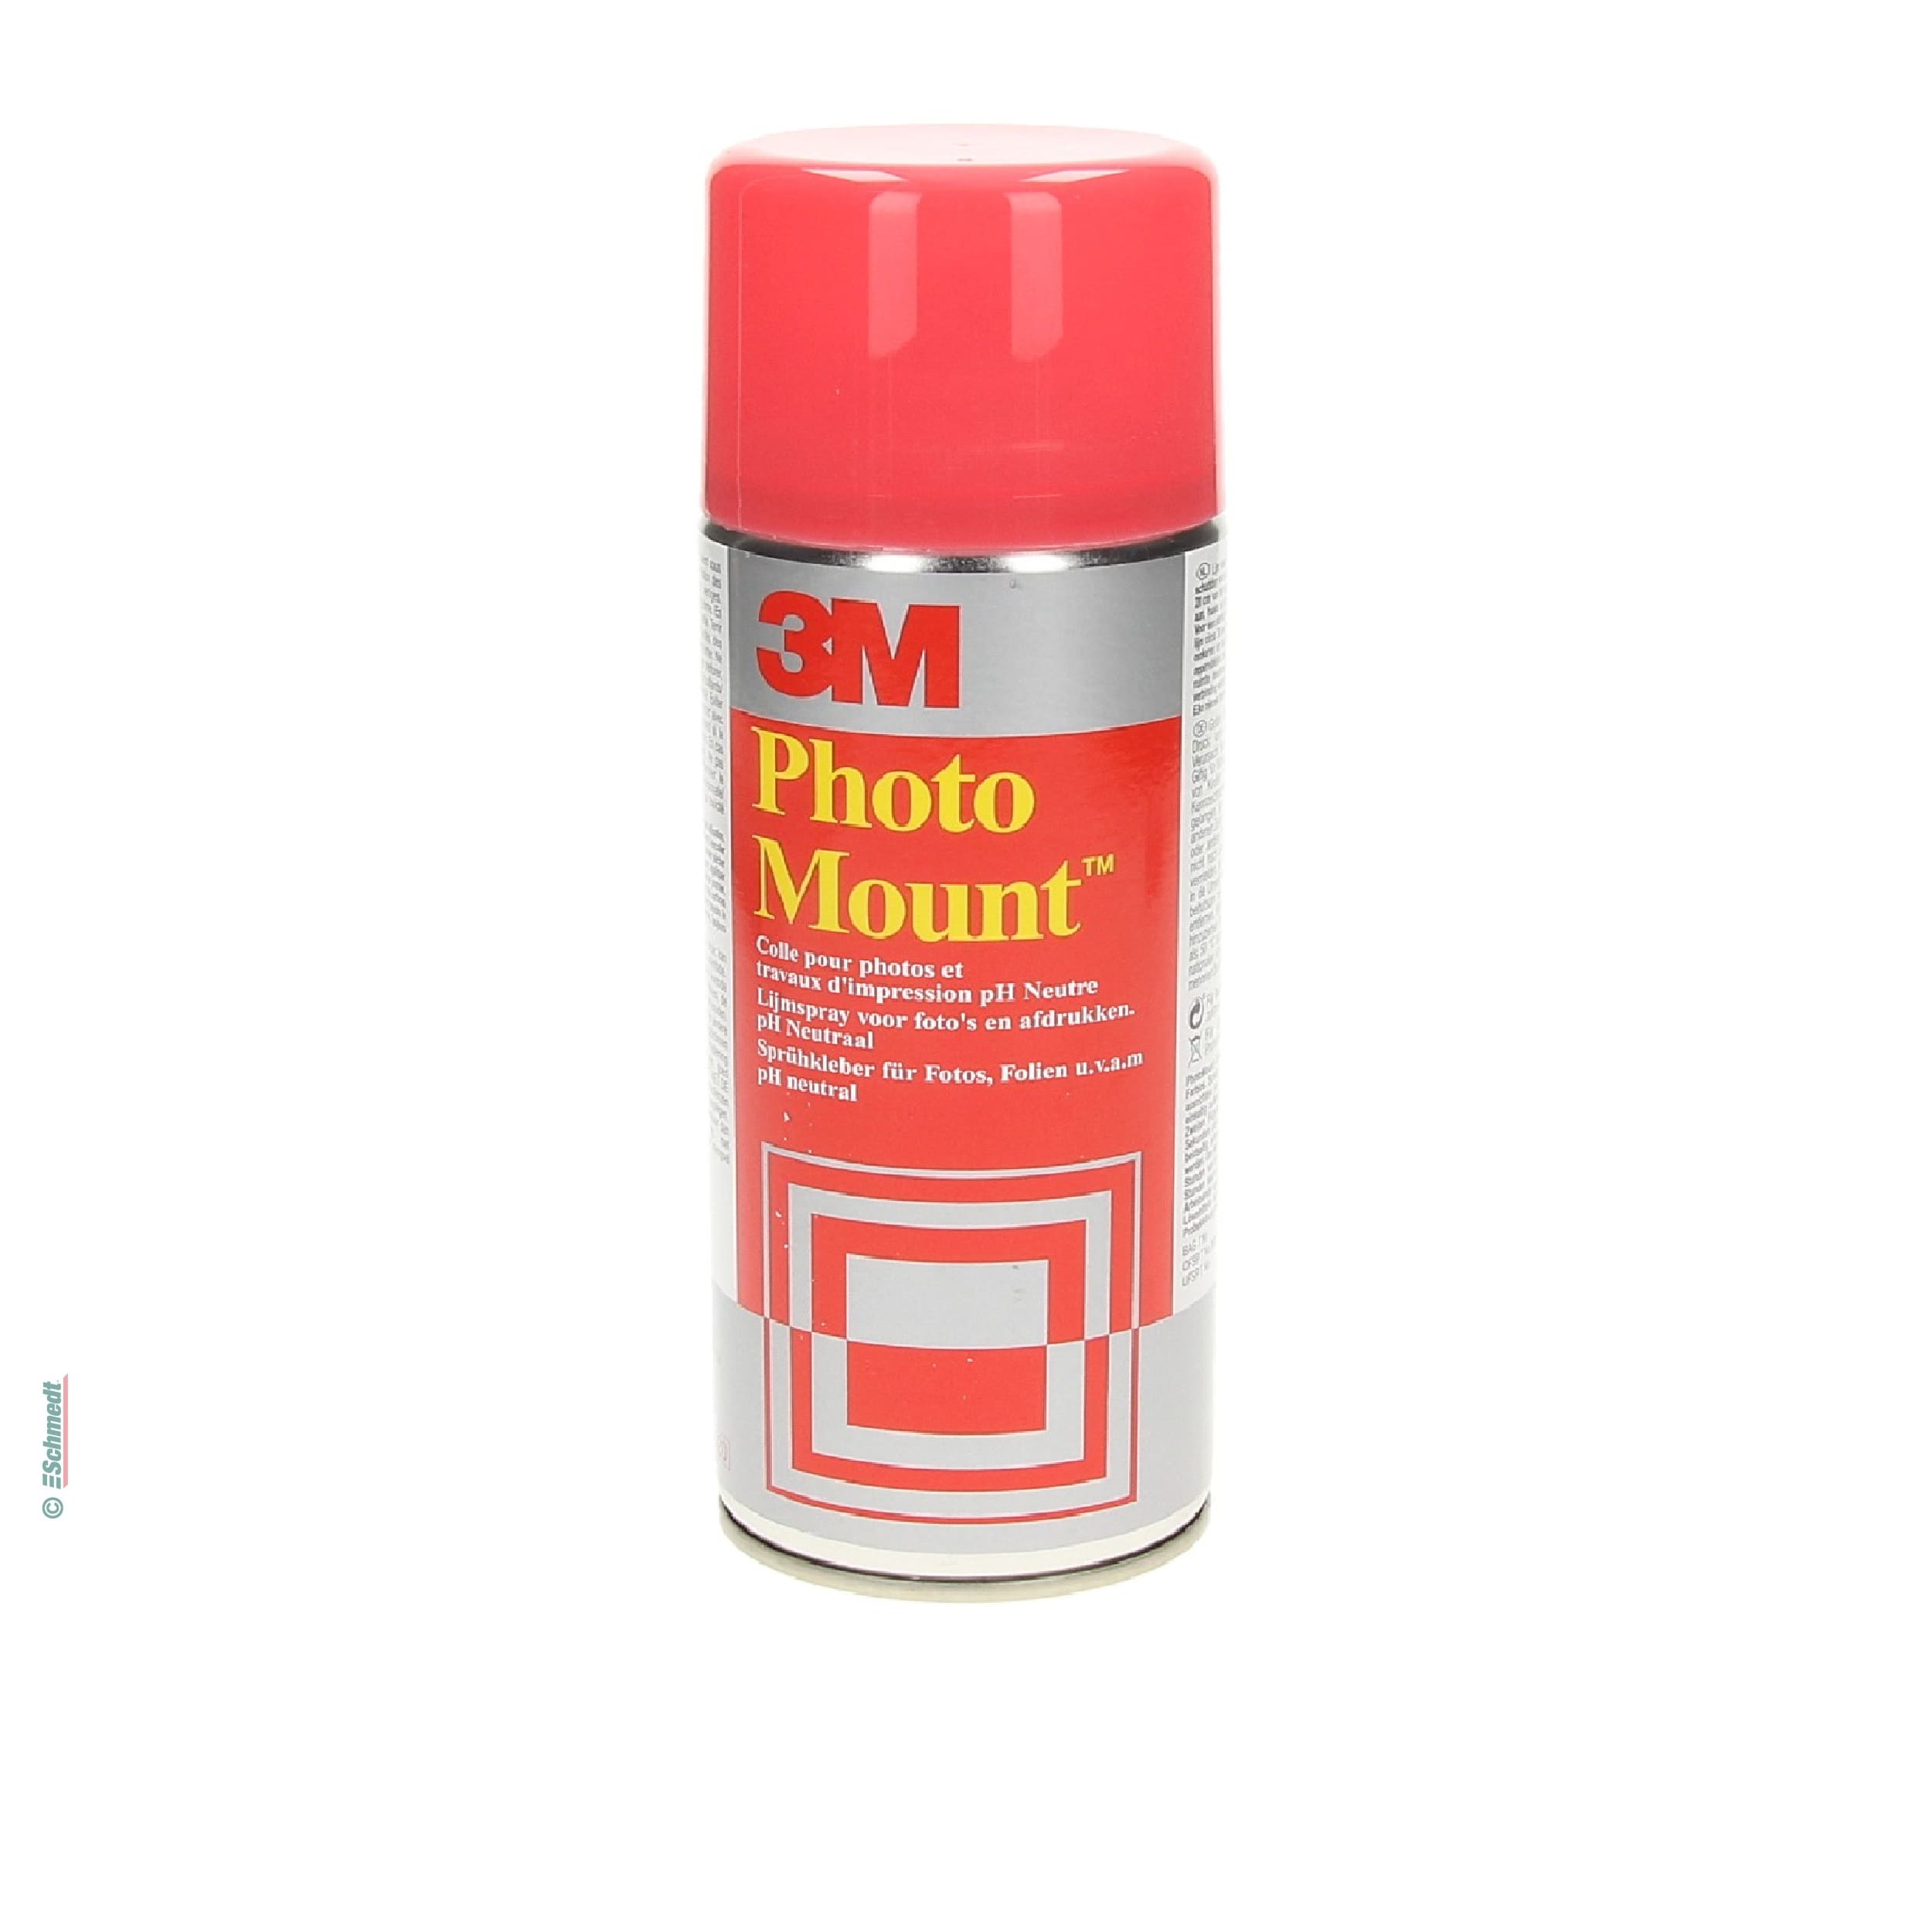 Spray adhesive Type PhotoMount - permanent bond - for permanent mounting of photos and posters. Ideal for photos, documents, drawings, print...